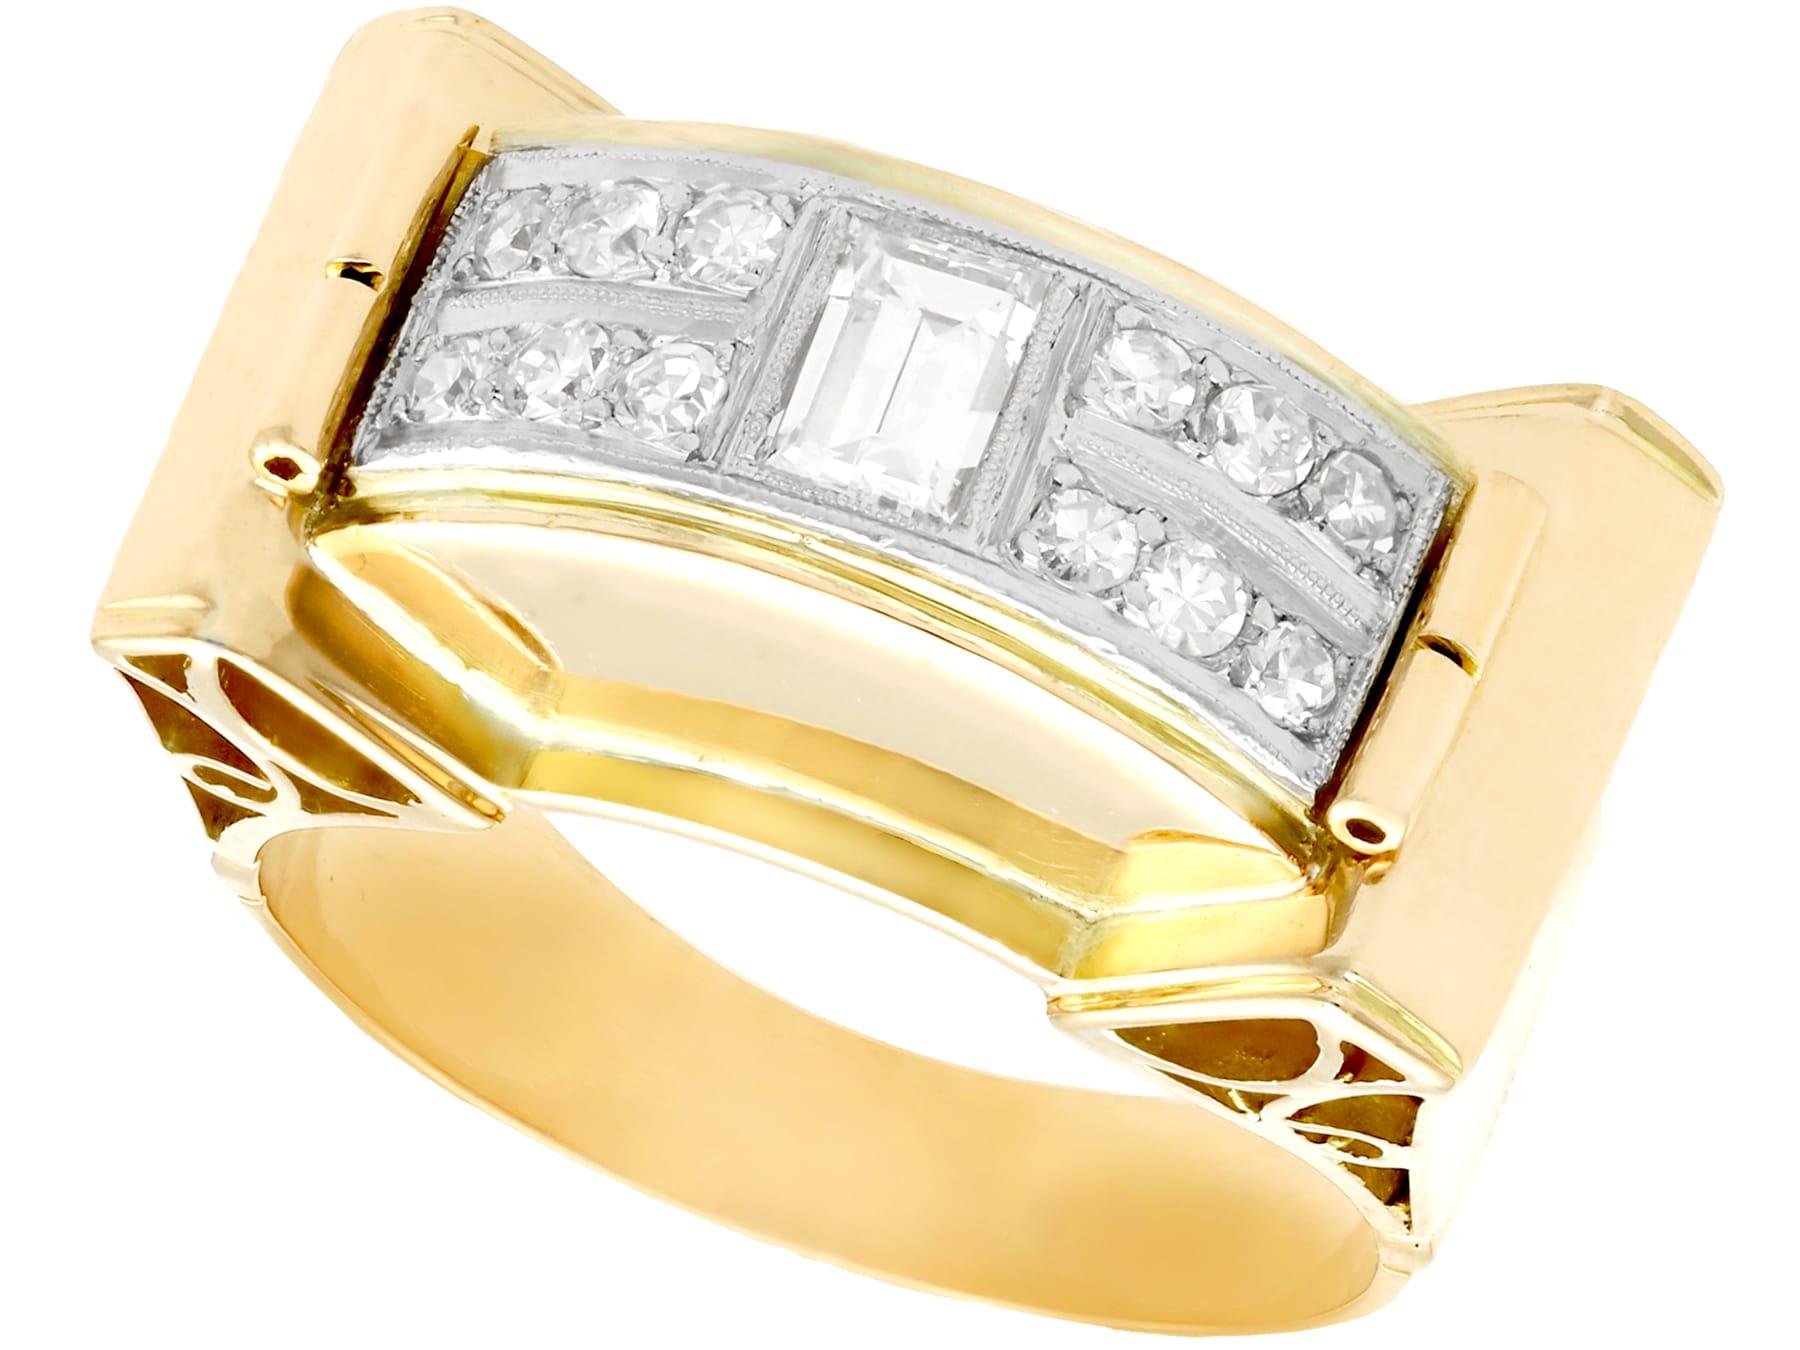 An impressive vintage Art Deco 0.98 carat diamond and 18 karat yellow gold, 18 karat white gold set dress ring; part of our diverse diamond jewelry and estate jewelry collections

This fine and impressive Art Deco diamond band ring has been crafted